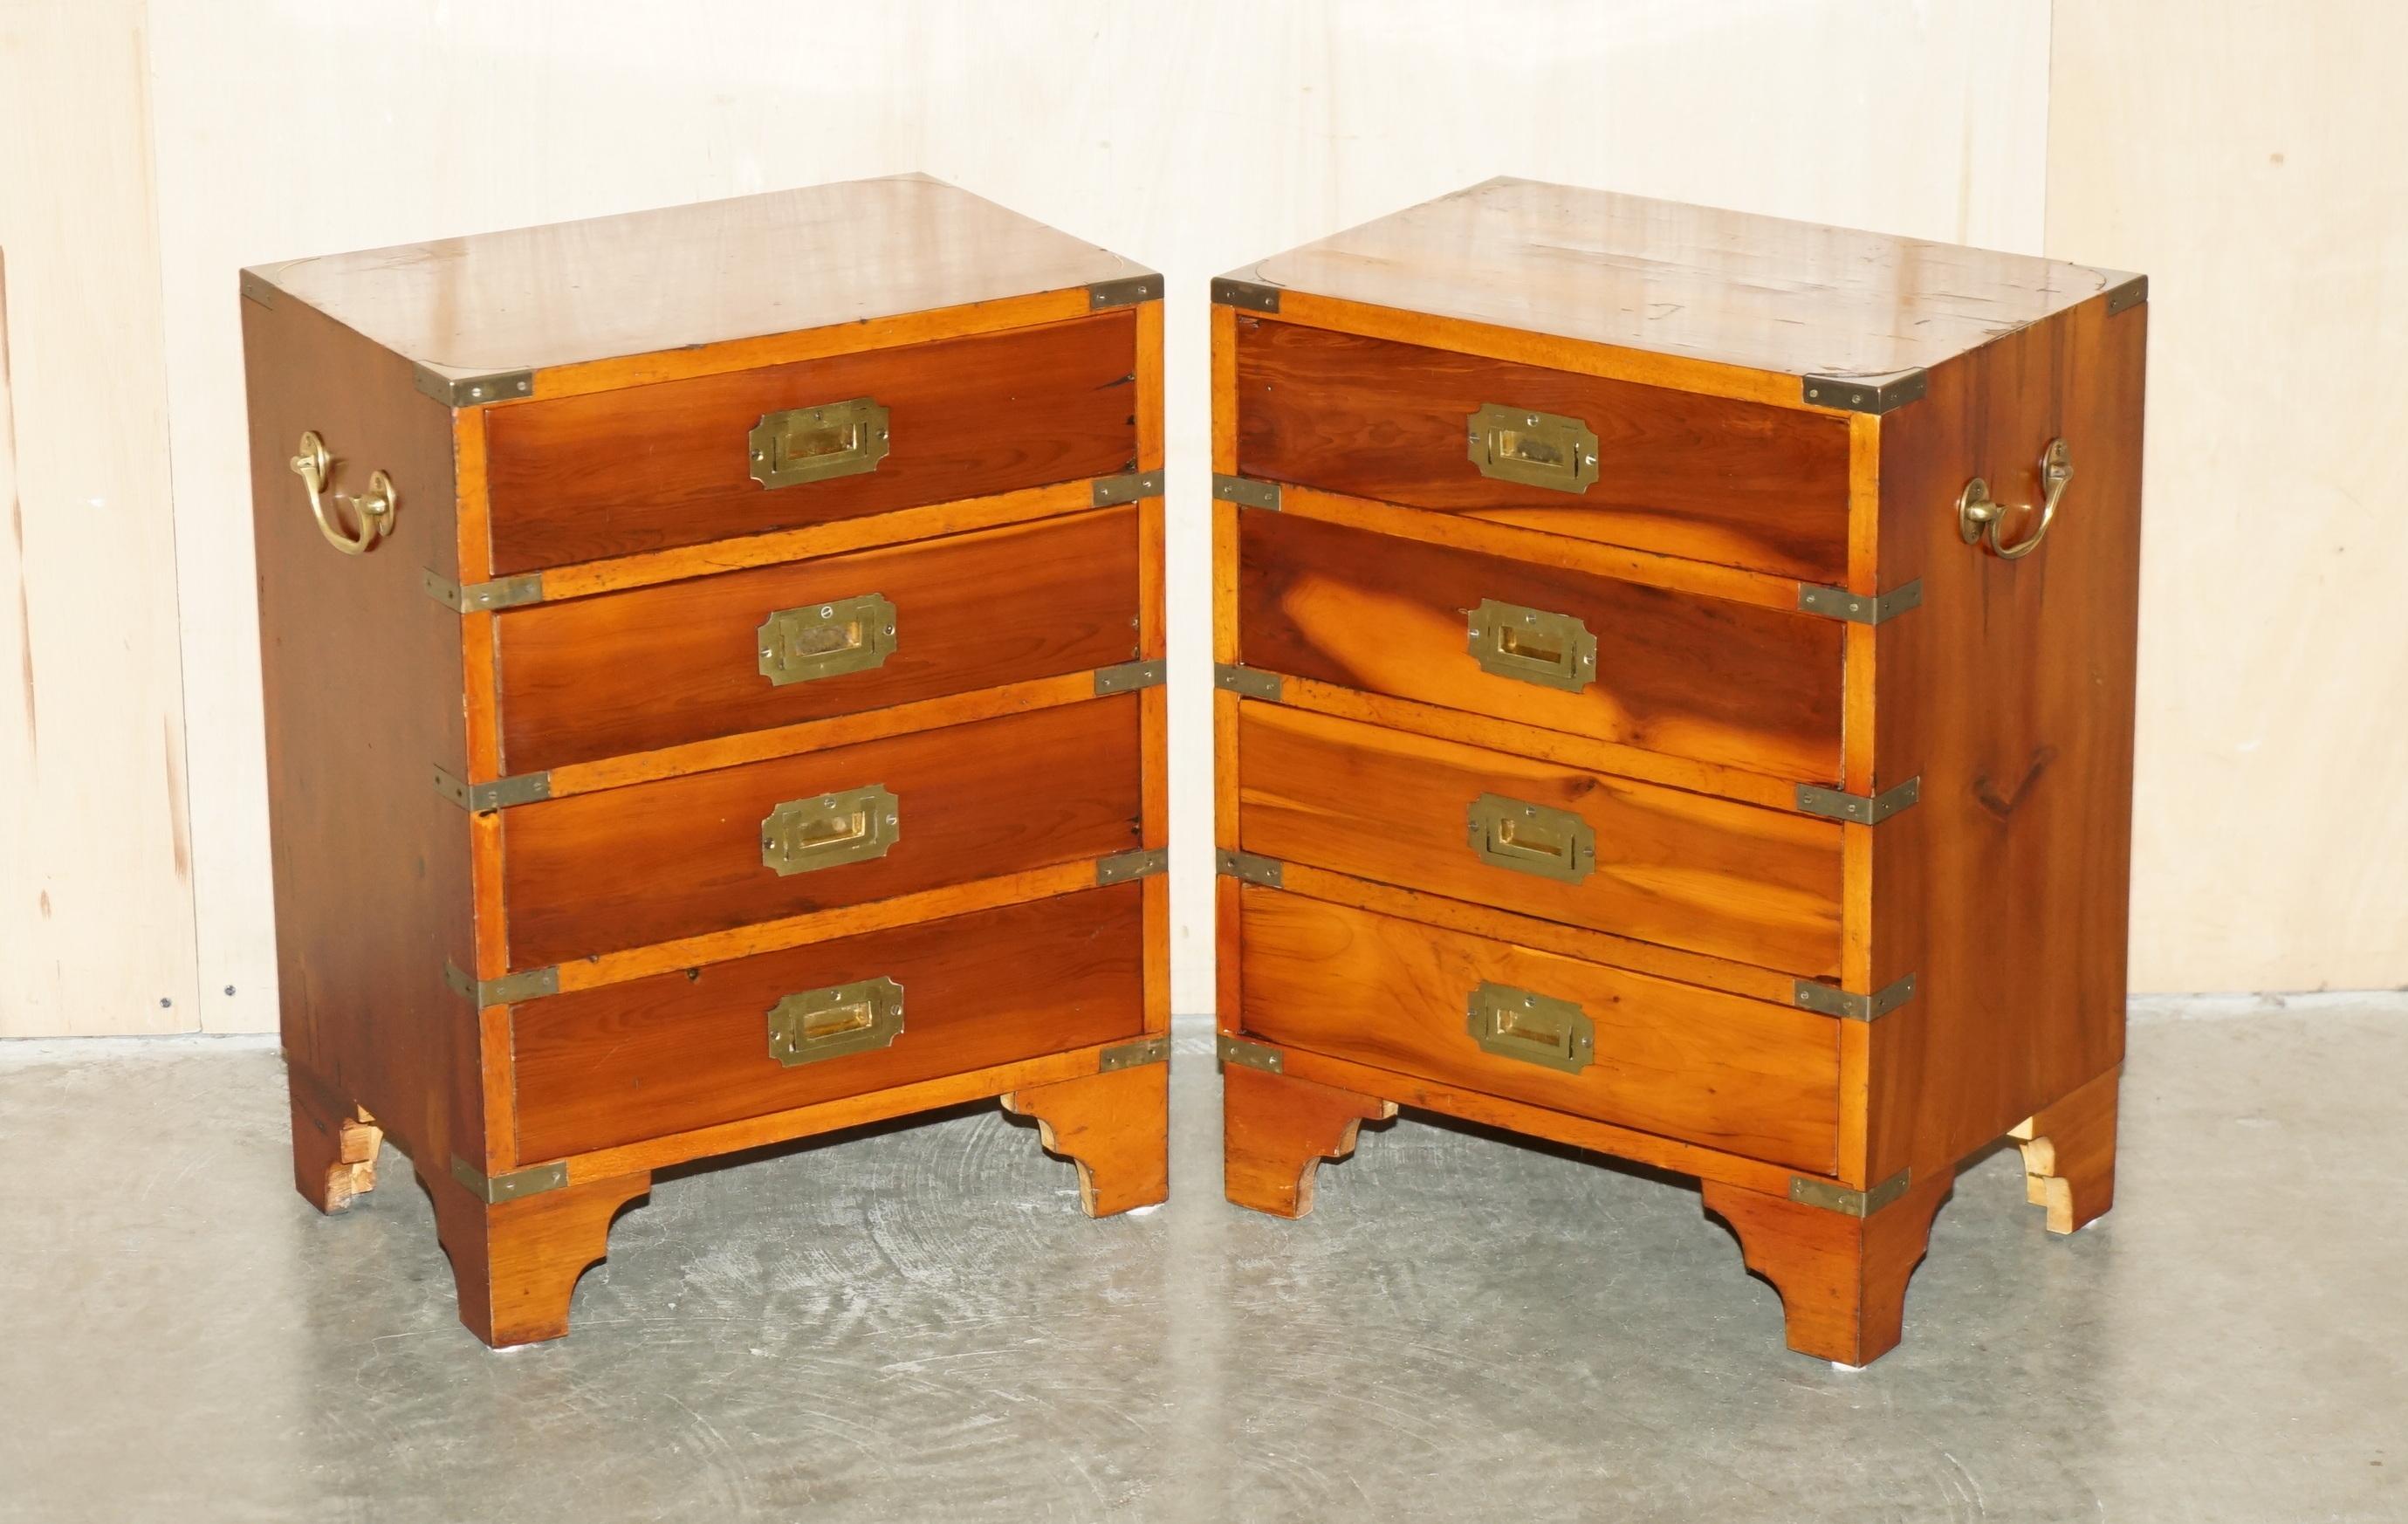 Royal House Antiques

Royal House Antiques is delighted to offer for sale this lovely pair of vintage Burr Yew wood & brass mounted Military Campaign style side tables with drawers that have well patinated tops 

Please note the delivery fee listed